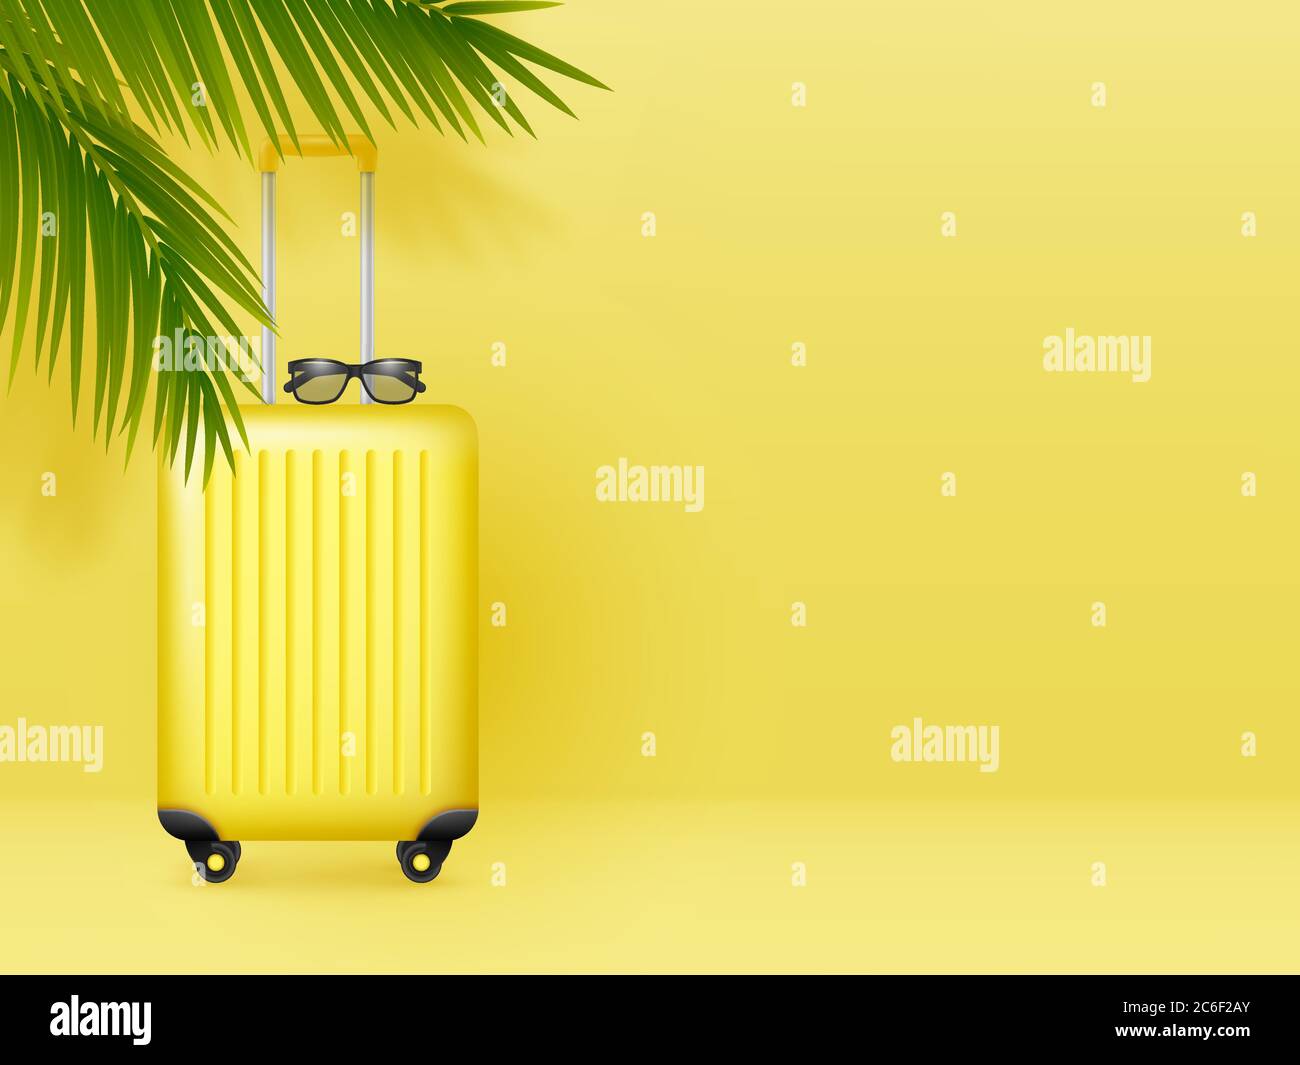 Suitcase with sunglasses and palm leaves. Stock Vector